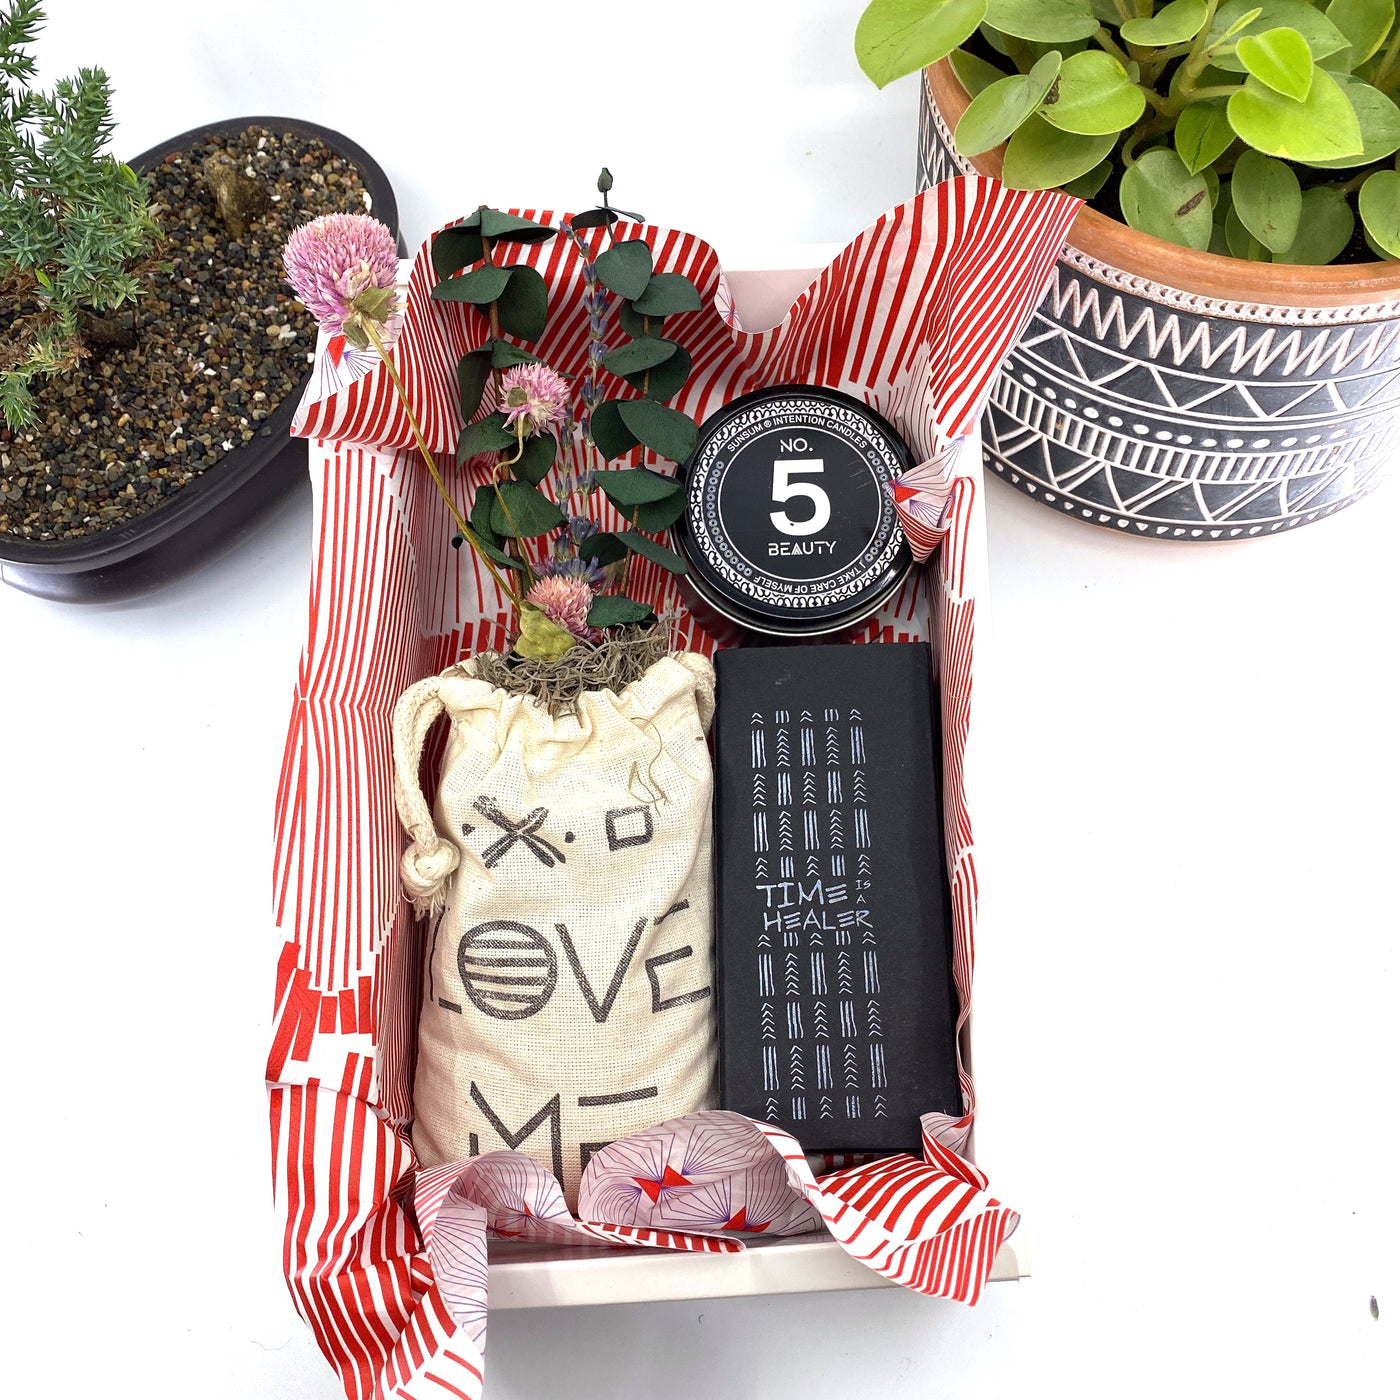 Words of Affirmation, Love Me, Dried Flower Bouquet & Self-Care, Gift Set